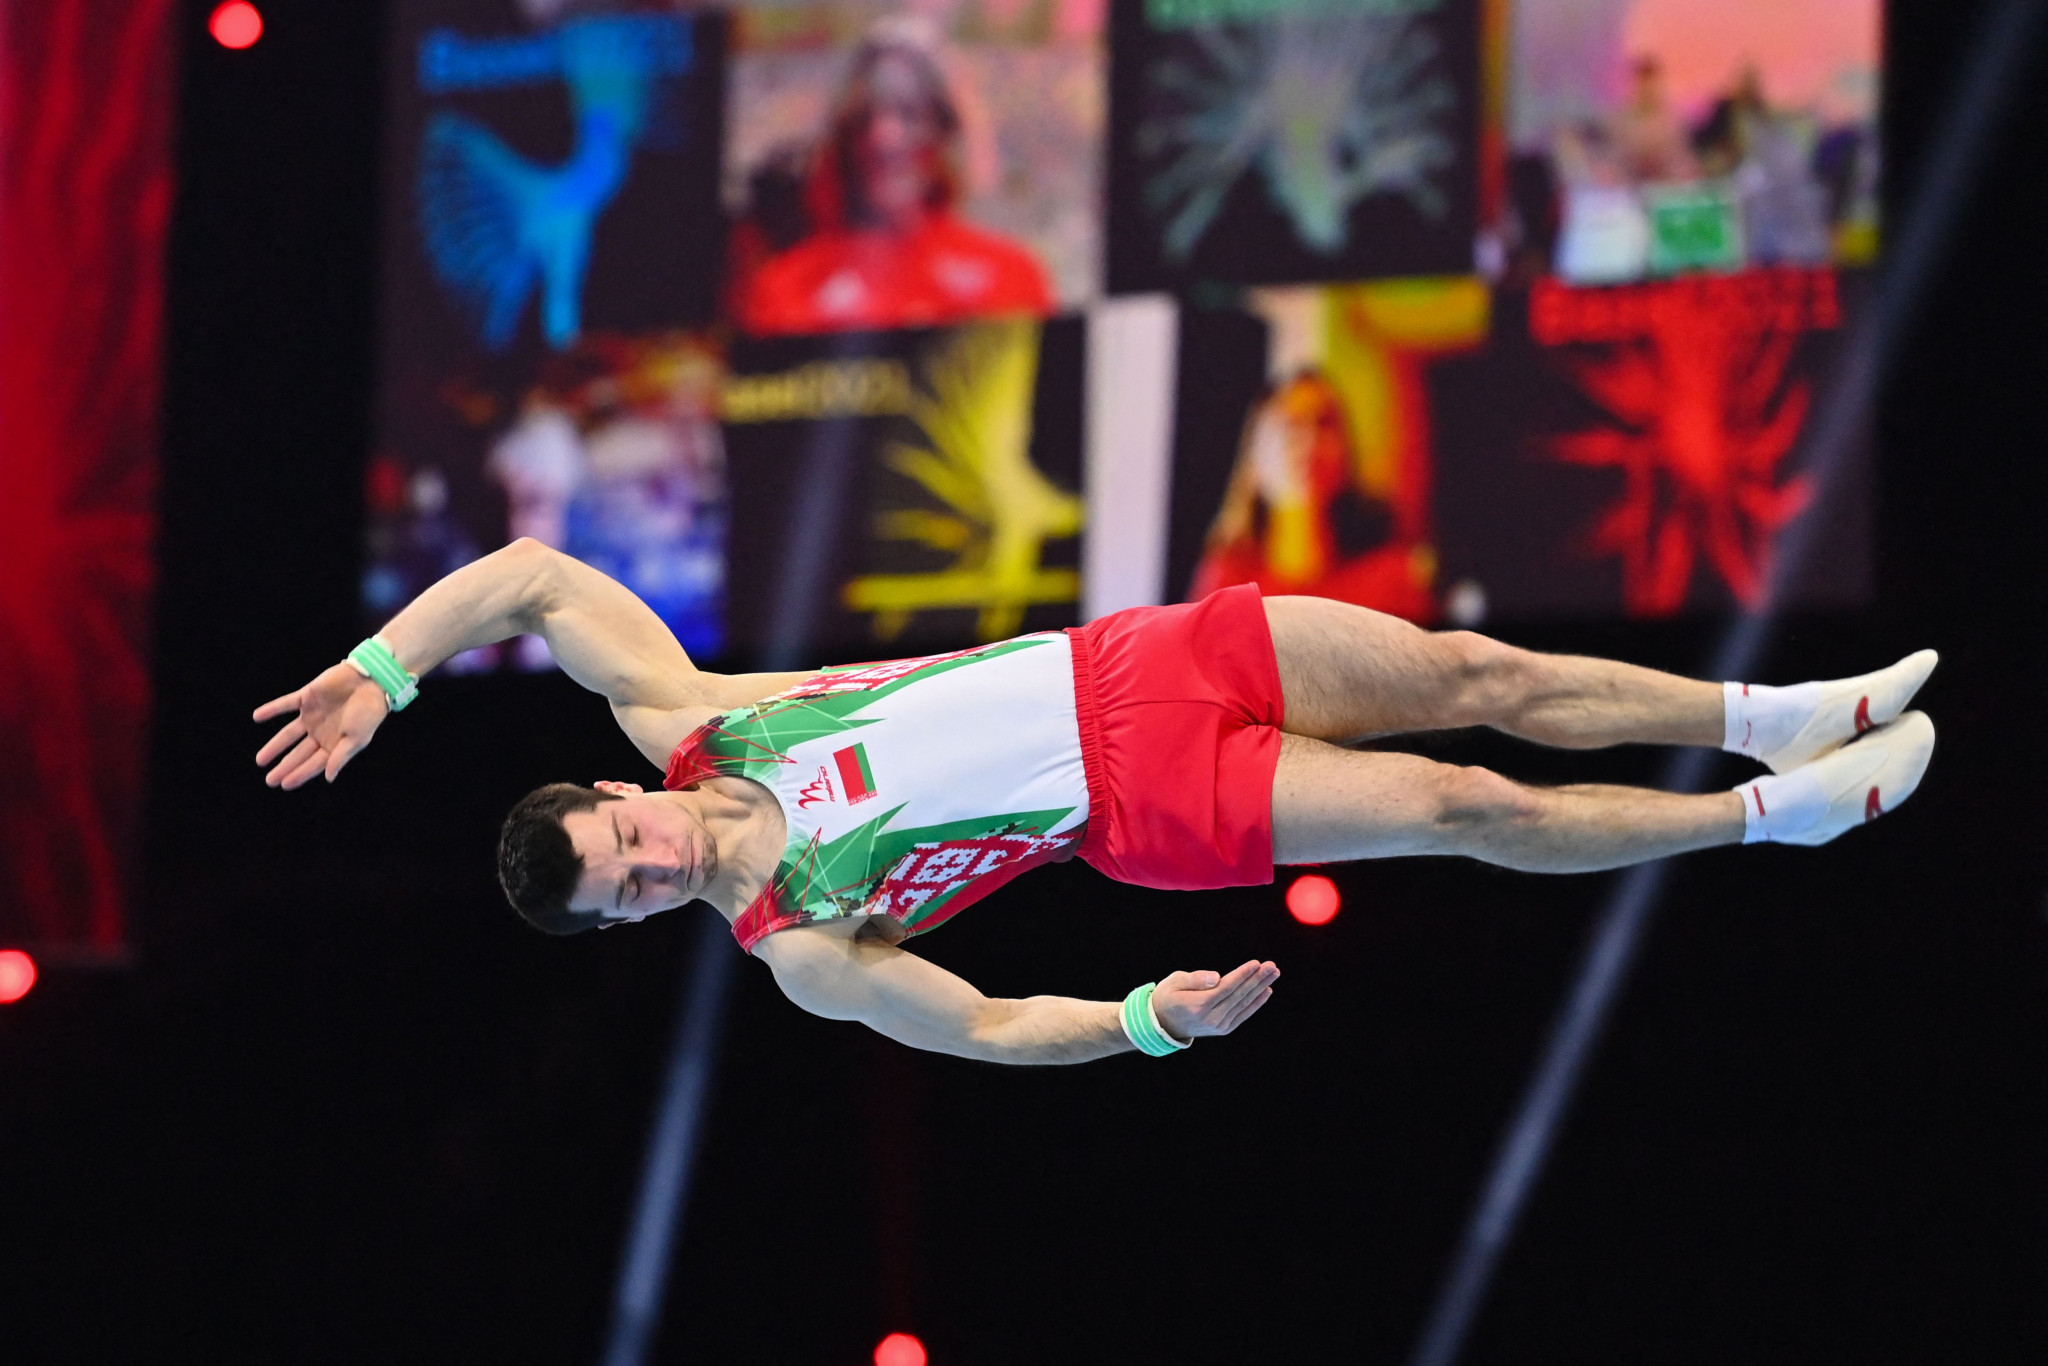 Russian and Belarusian athletes on start list for FIG Apparatus World Cup in Doha